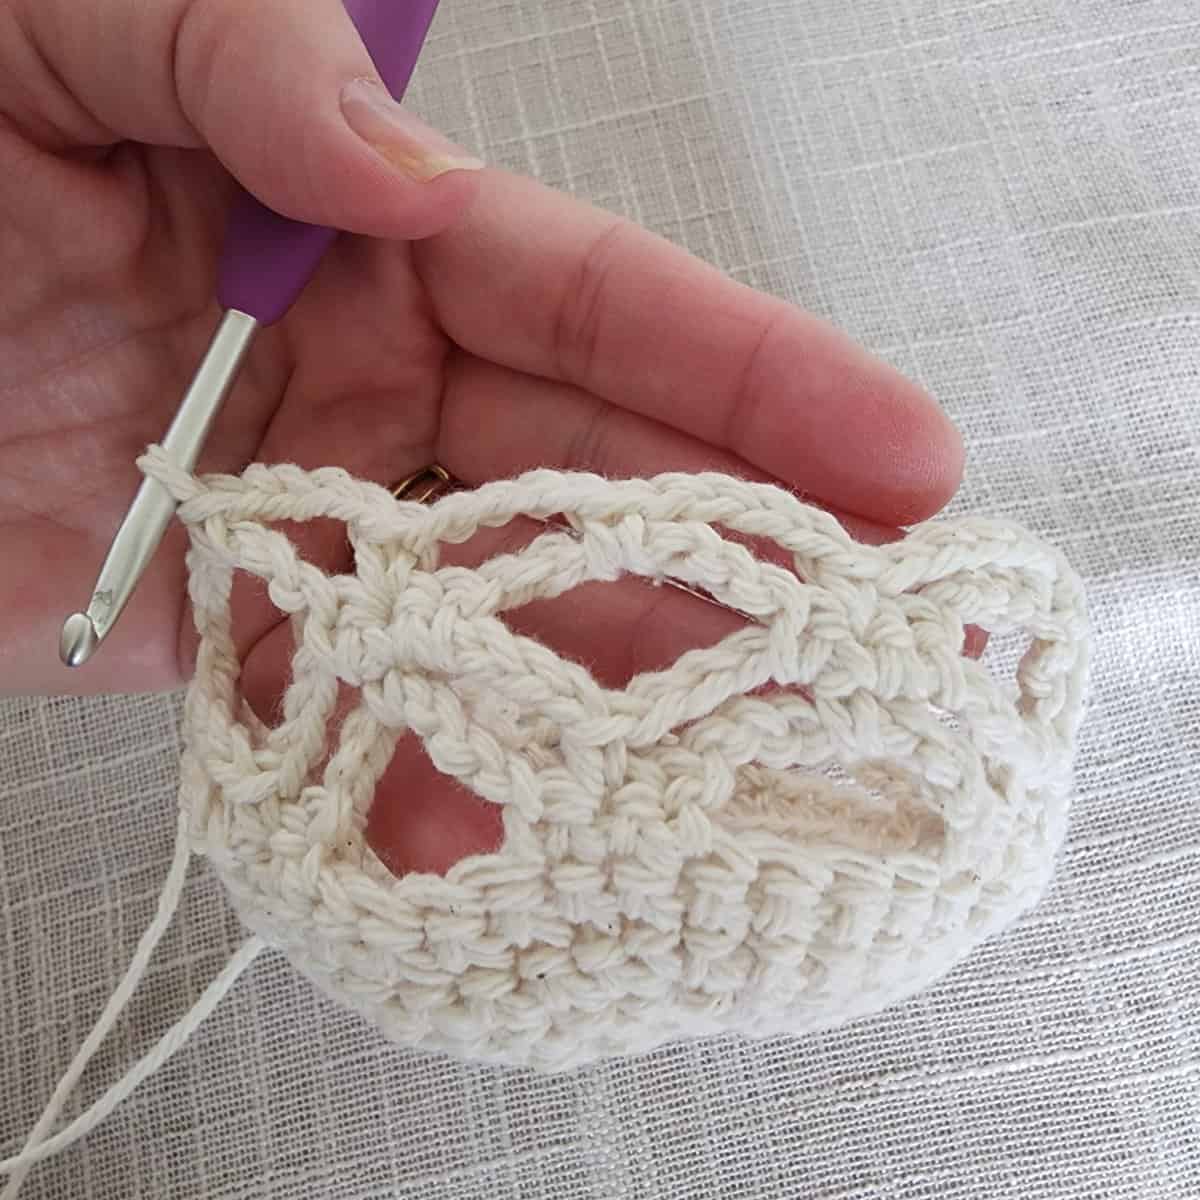 Cream yarn used to crochet lace on plant hanger basket.